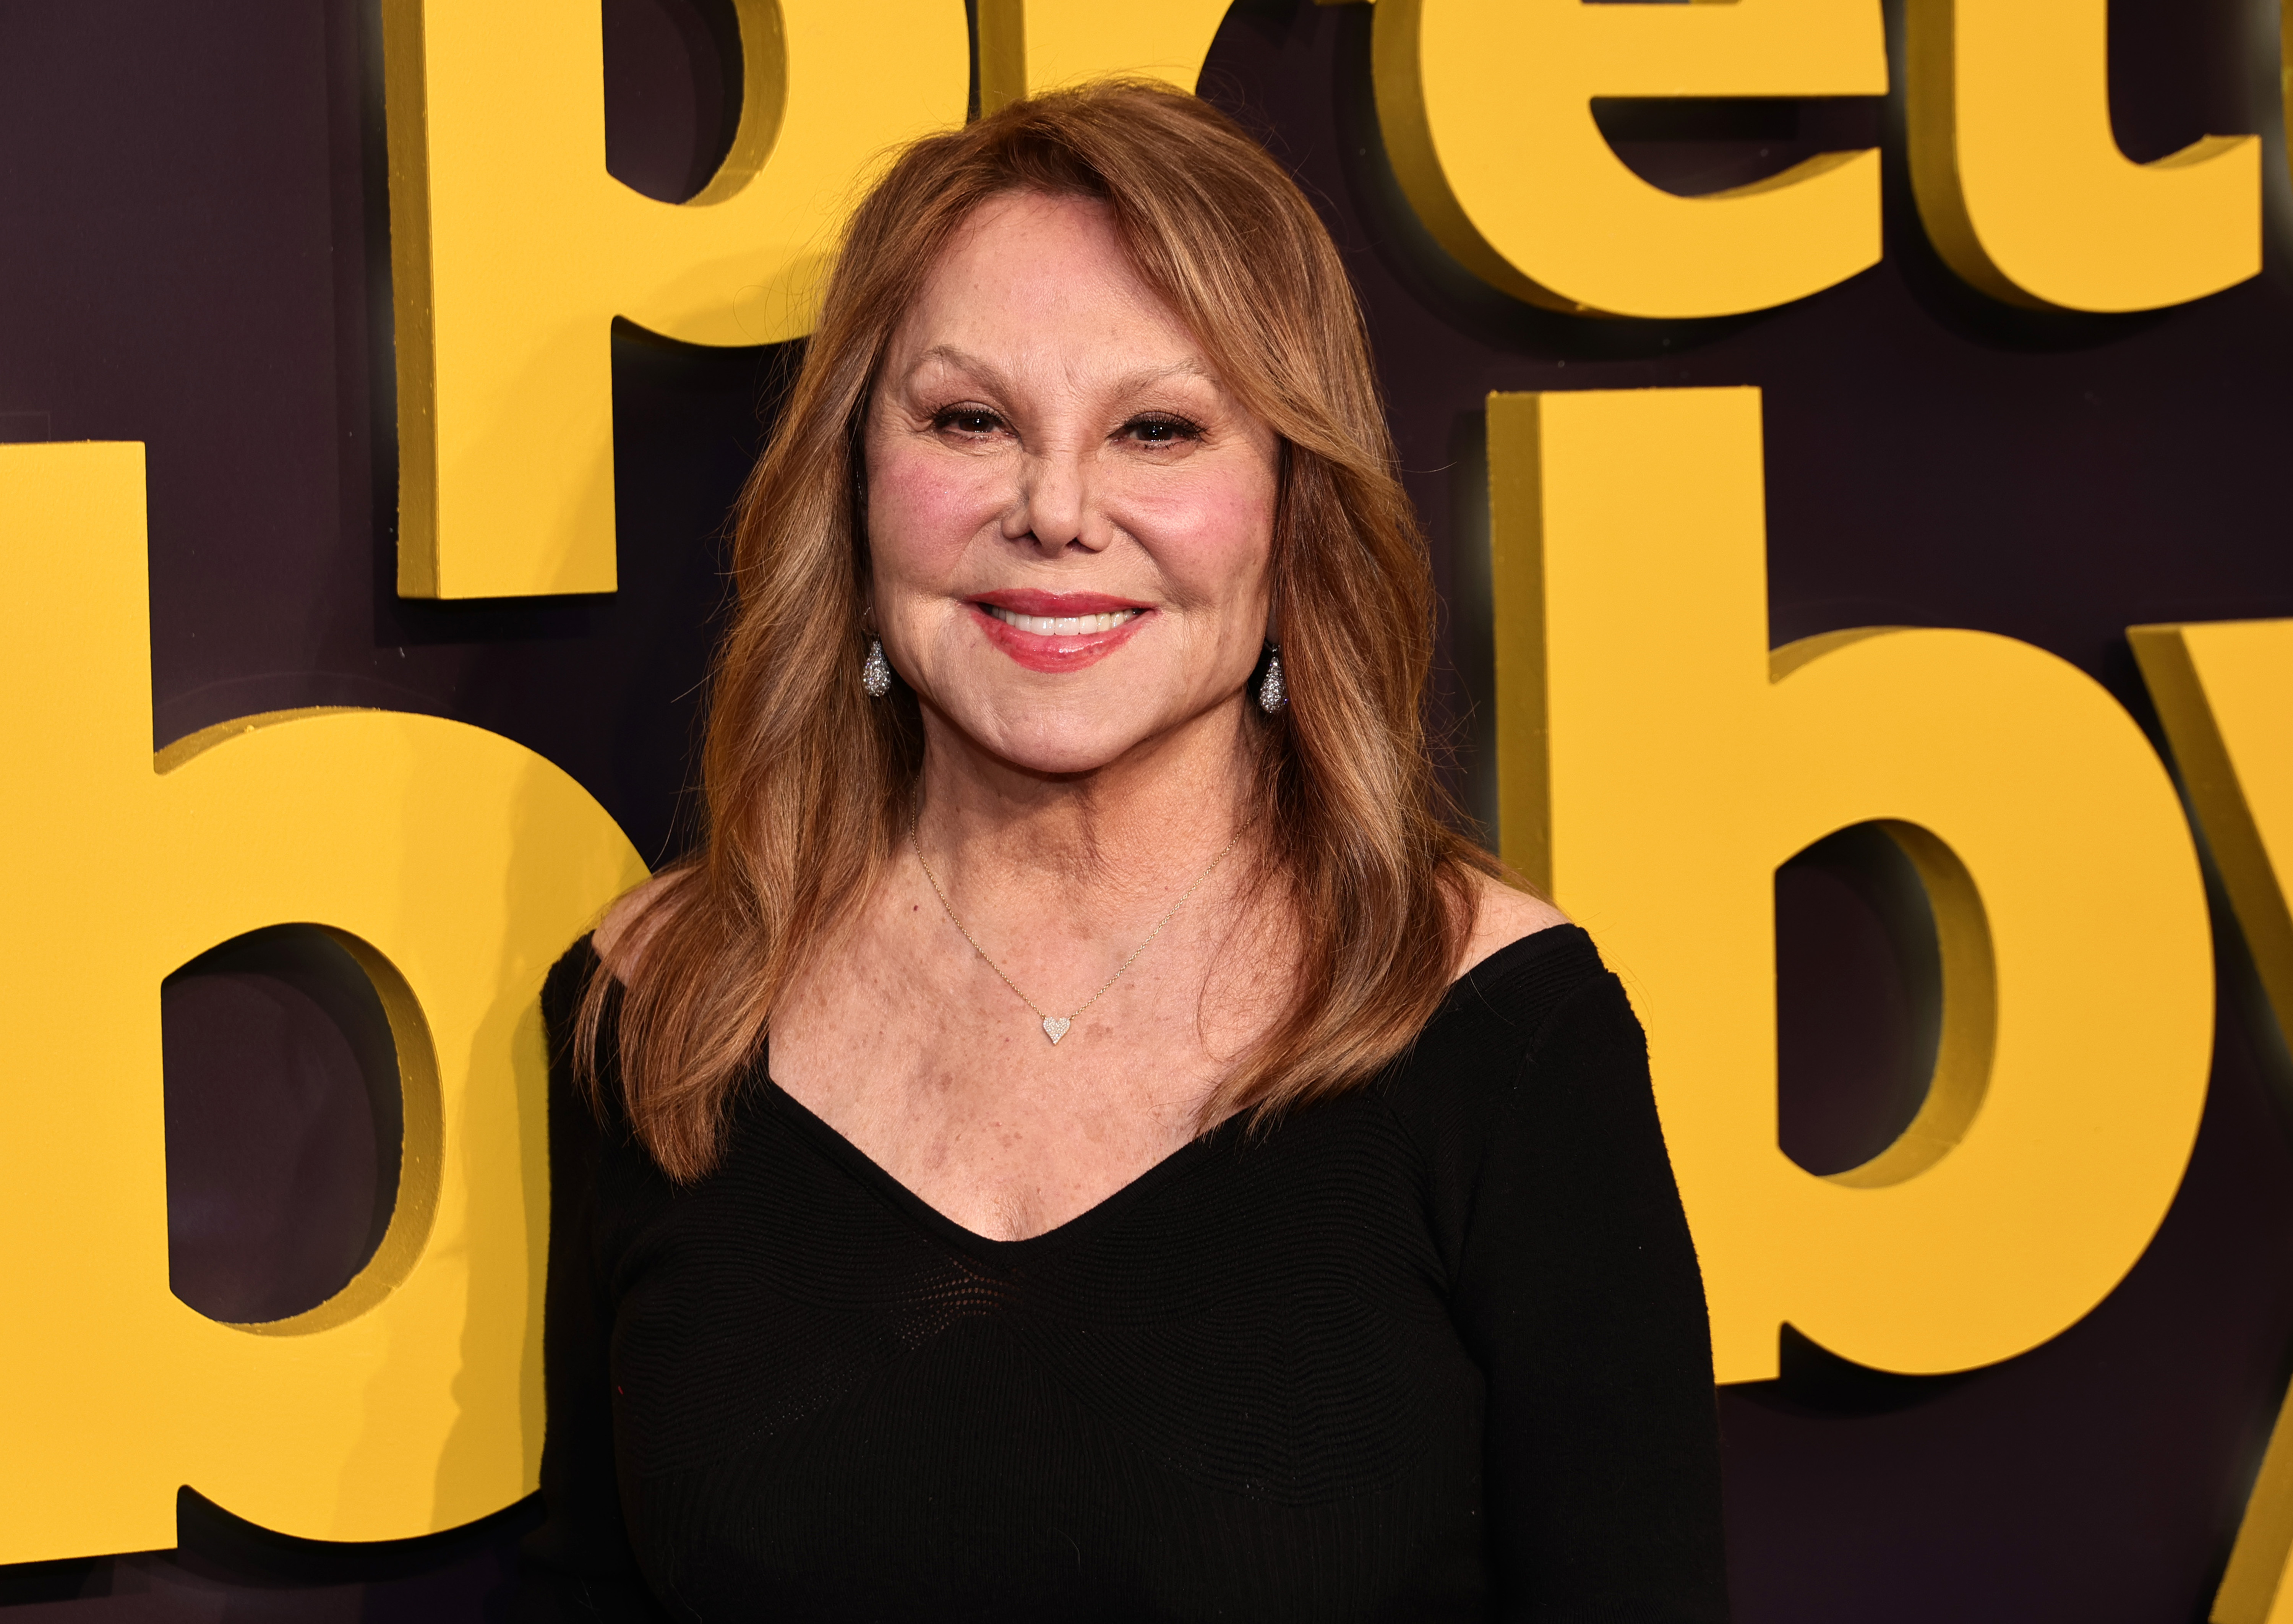 Marlo Thomas at the New York Premiere of "Pretty Baby: Brooke Shields" at Alice Tully Hall on March 29, 2023, in New York City | Source: Getty Images